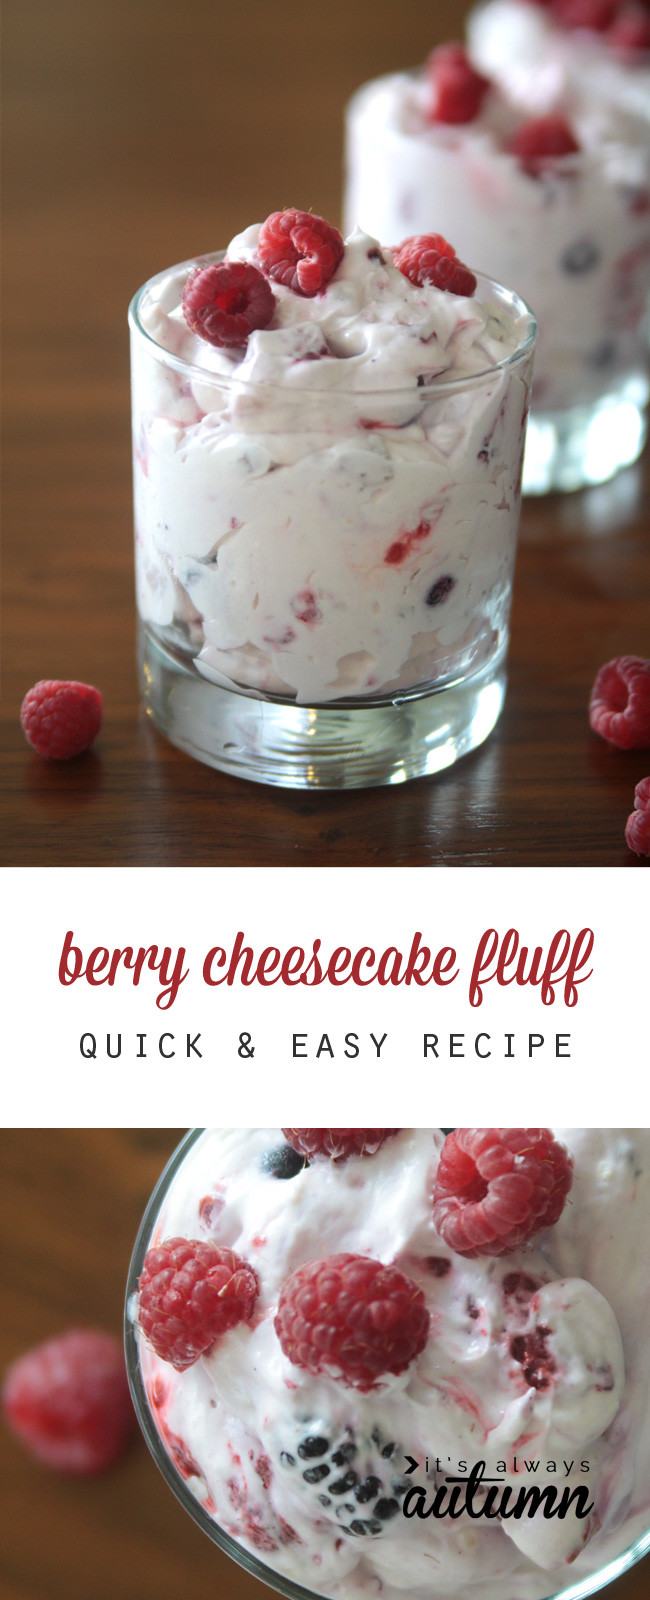 Quick Easy Christmas Desserts
 berry cheesecake fluff a lighter holiday dessert It s